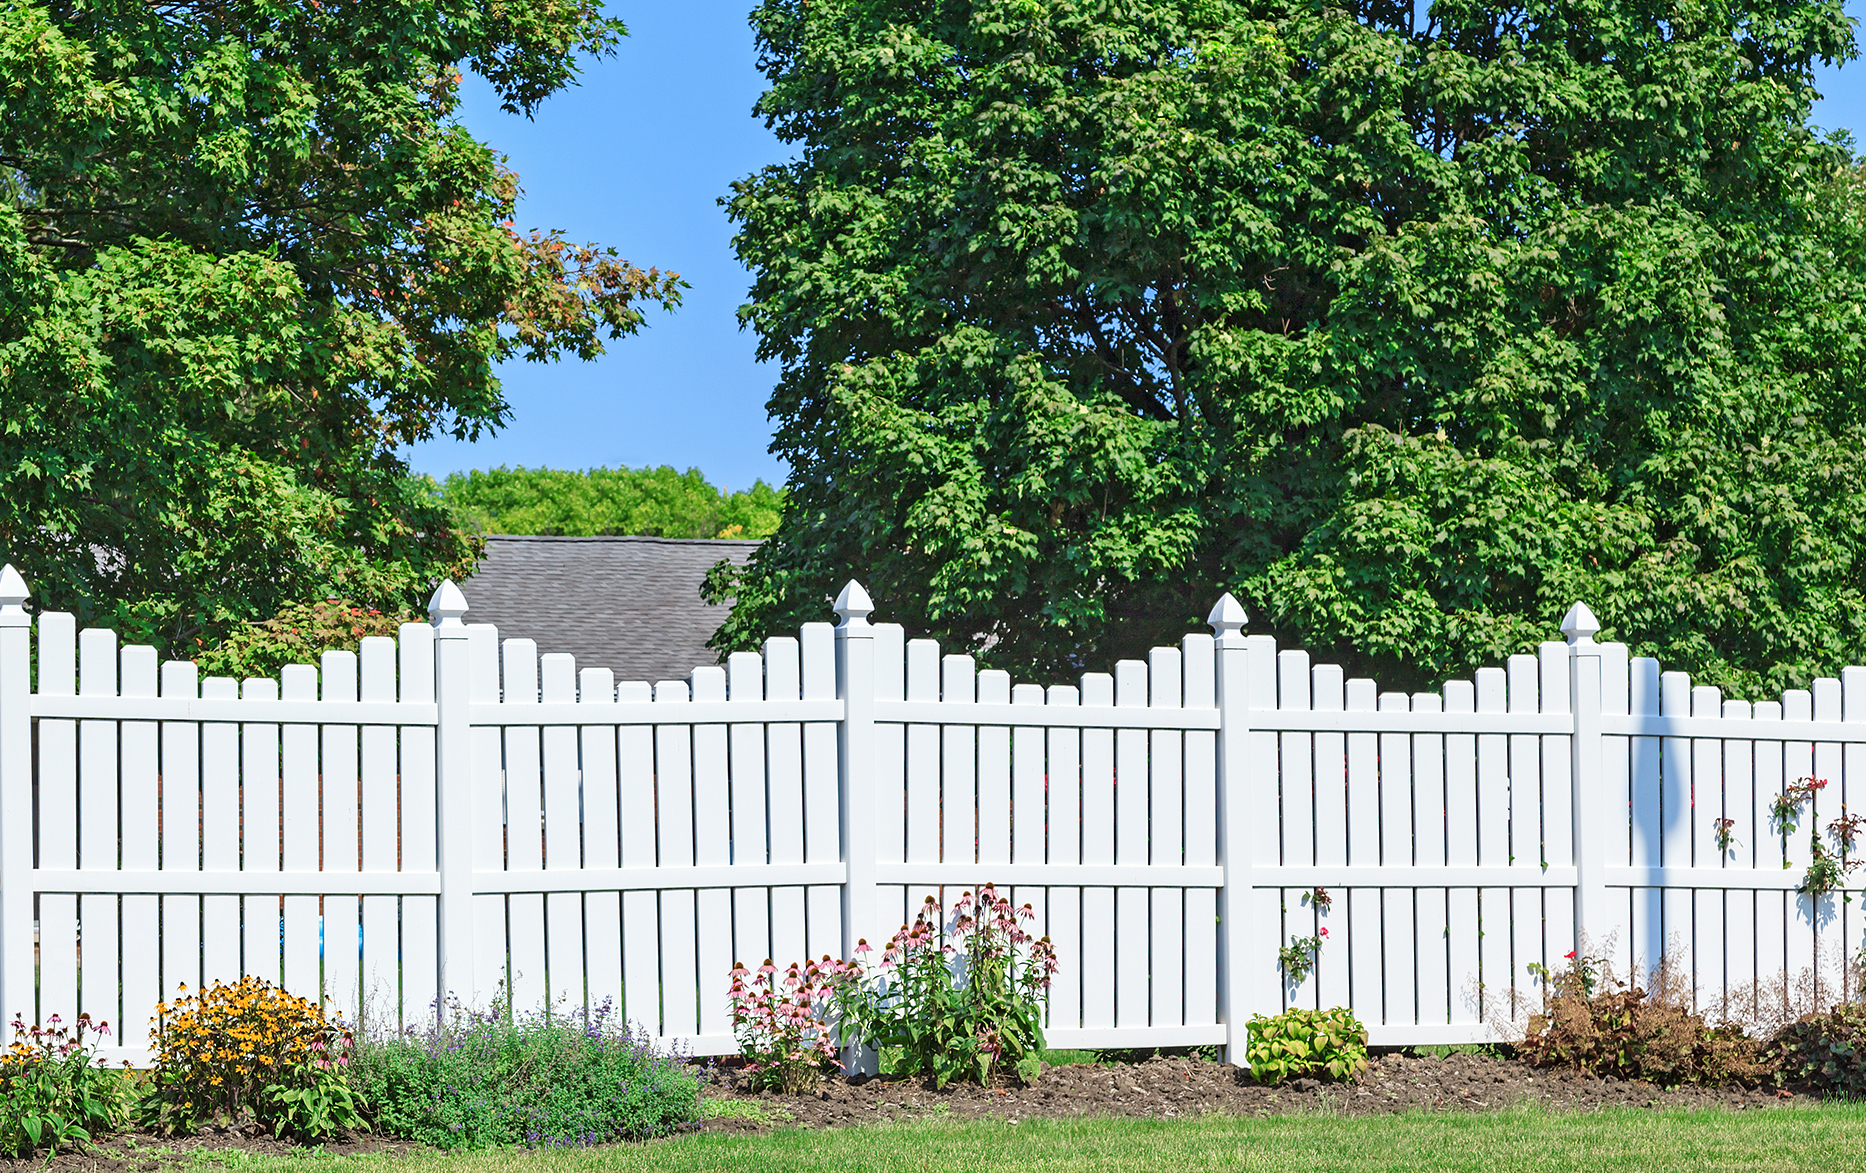 How to Clean a Vinyl Fence